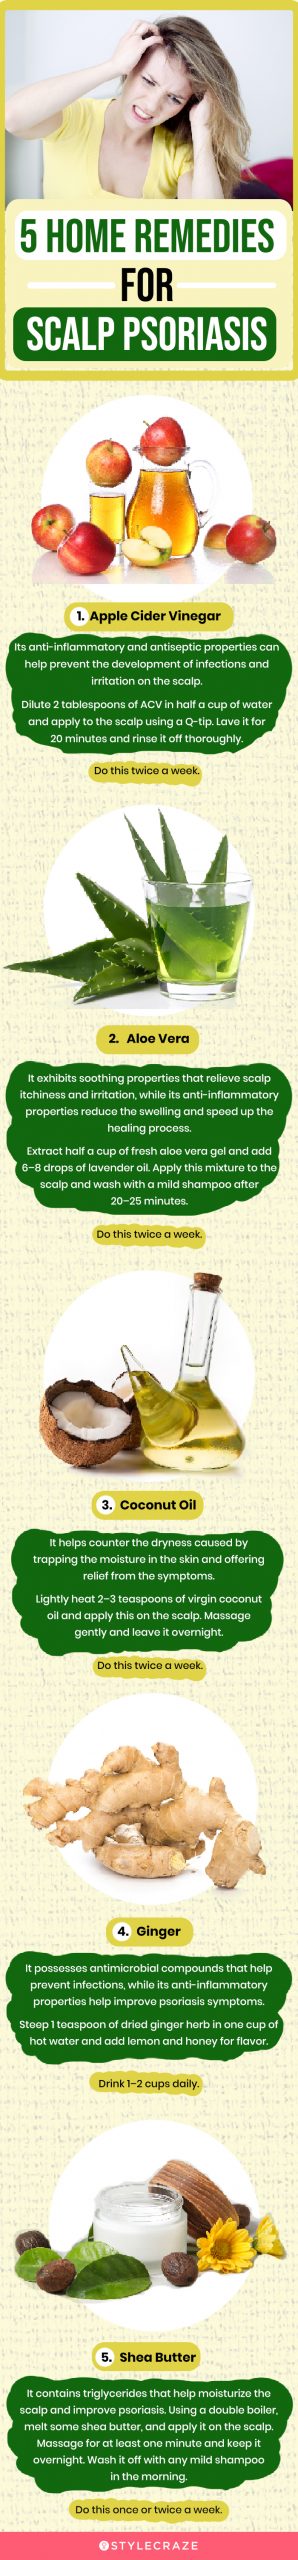 5 home remedies for scalp psoriasis [infographic]